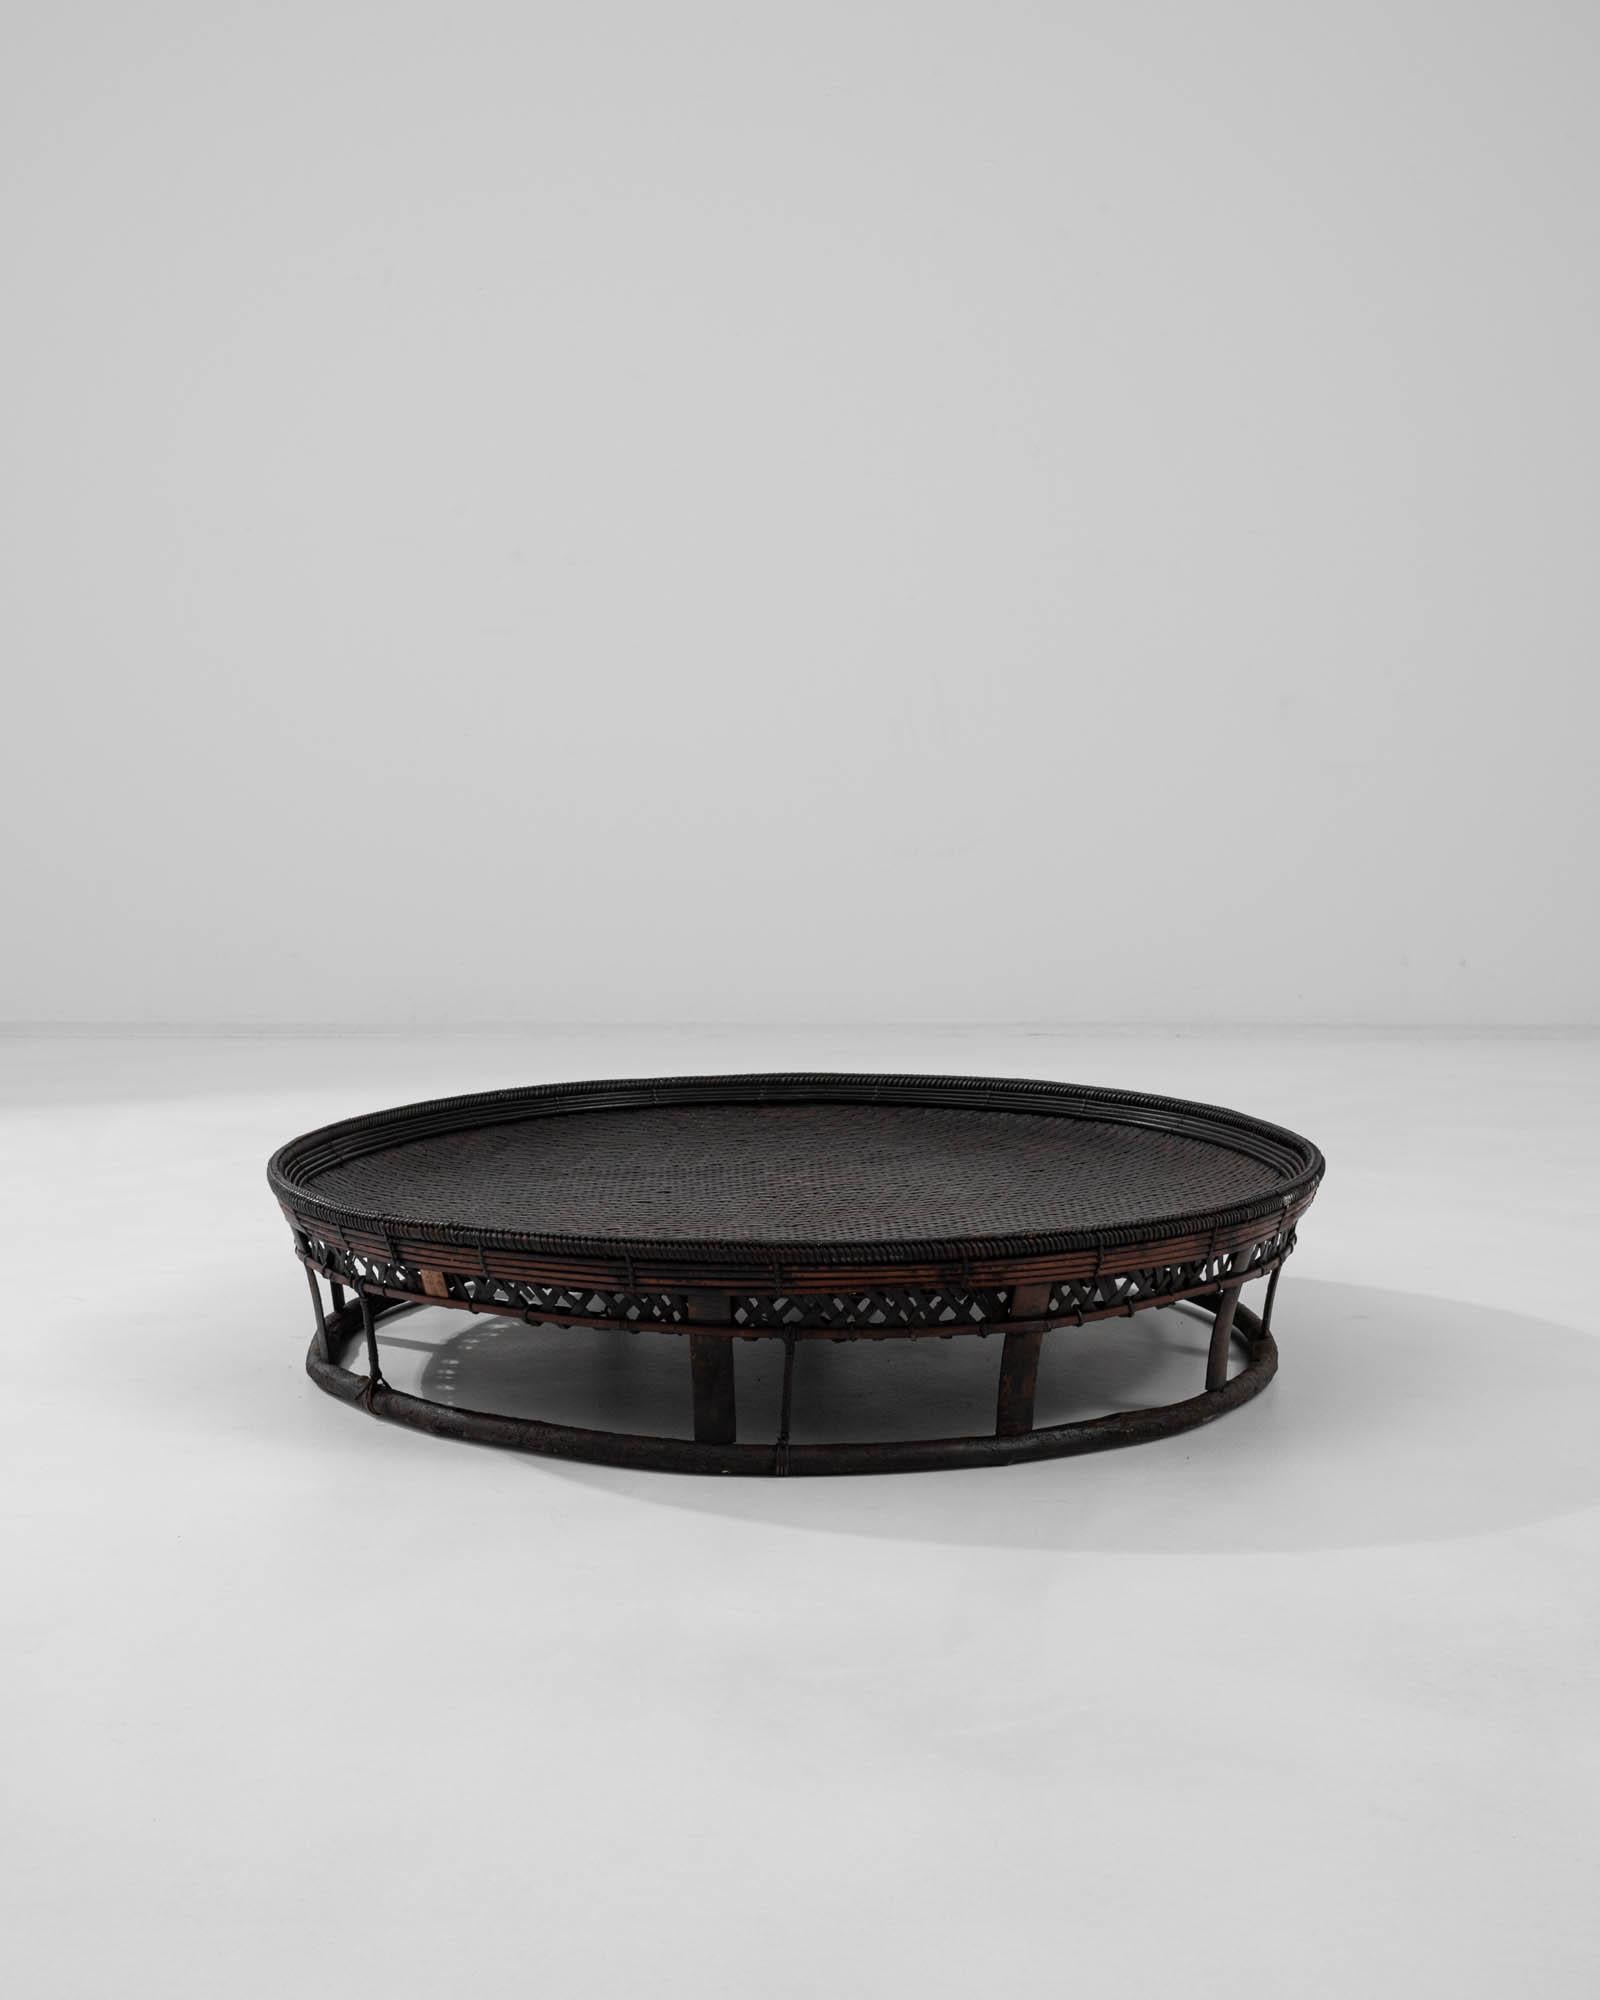 A wooden coffee table created in Asia during the 20th century. Low, circular, and dark, this exquisite coffee table emits an enigmatic charisma that draws one toward it. Composed of circularly bent wooden splints, an ample circle has been expertly